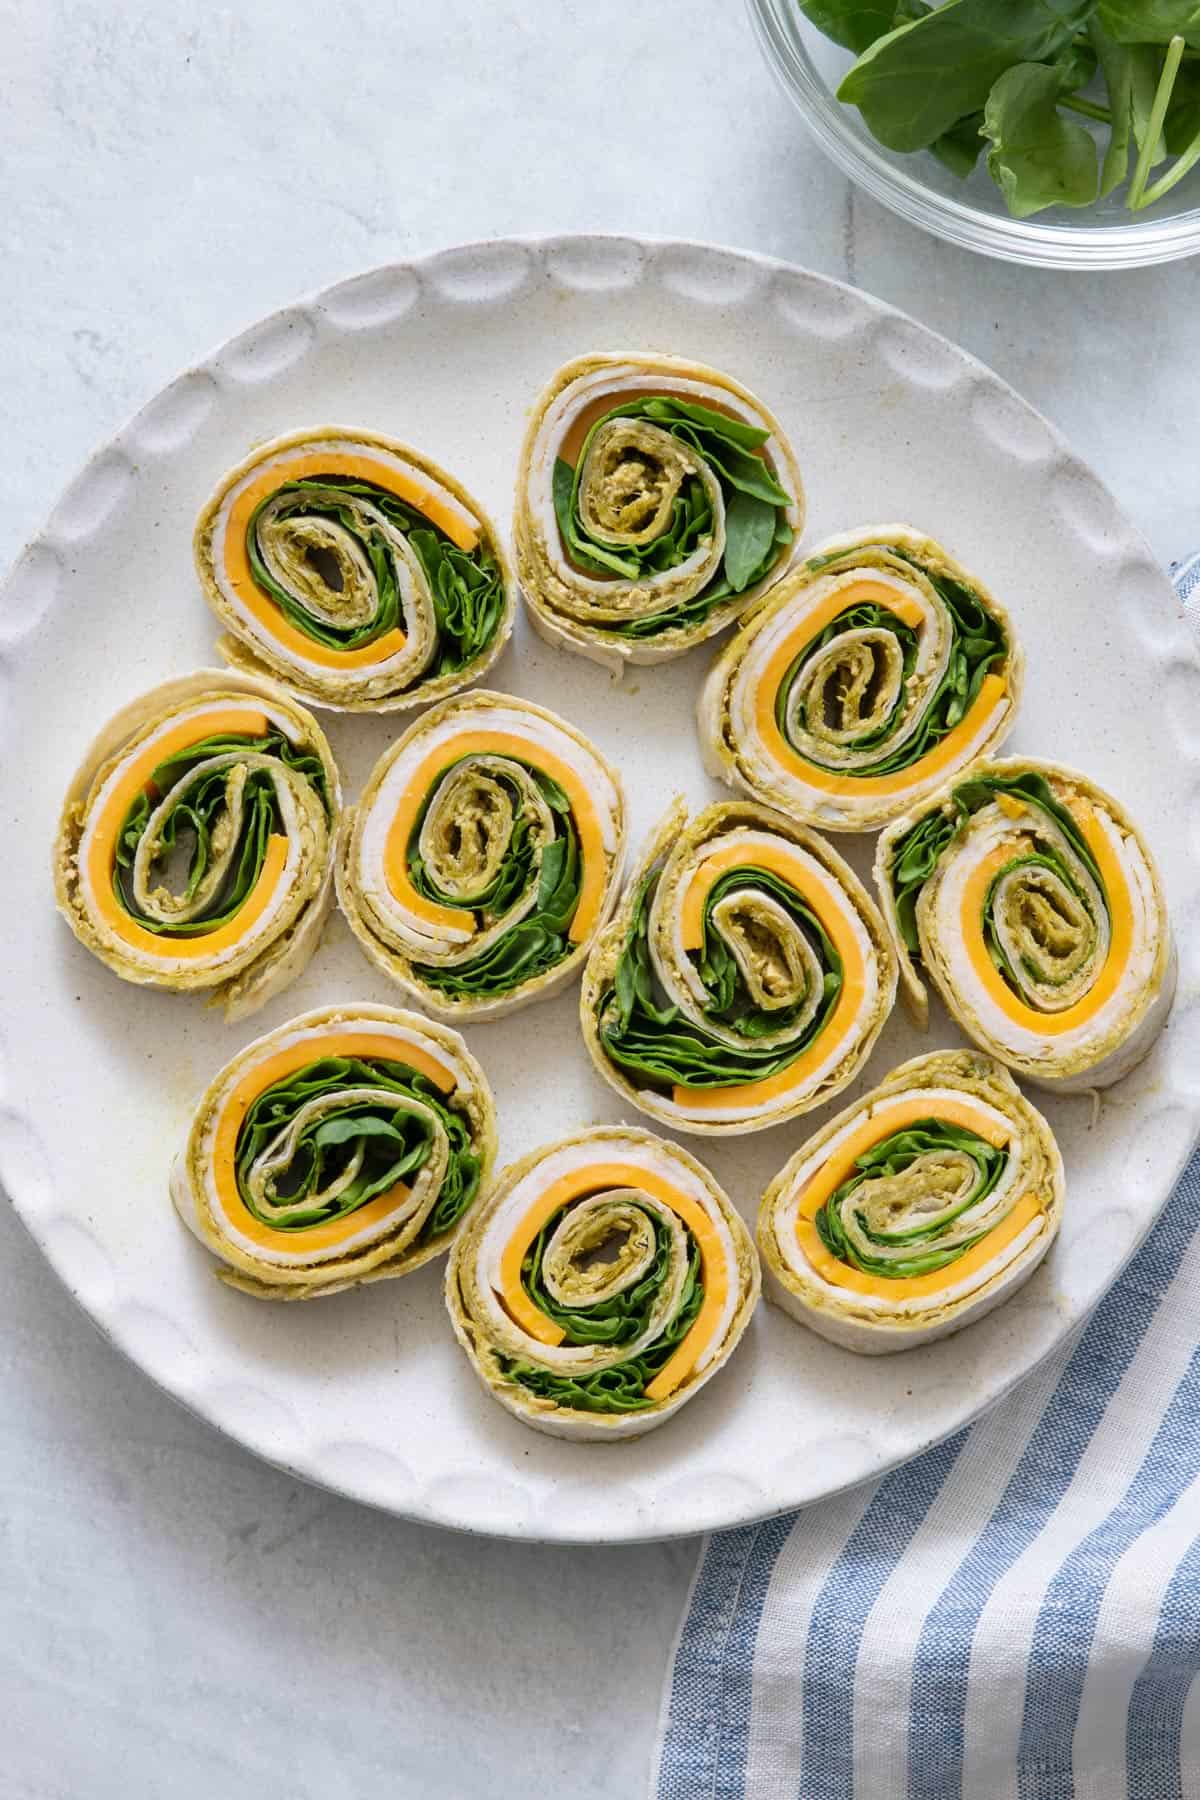 Pesto turkey pinwheel sandwiches on a round plate with bowl of fresh spinach off screen on sides.